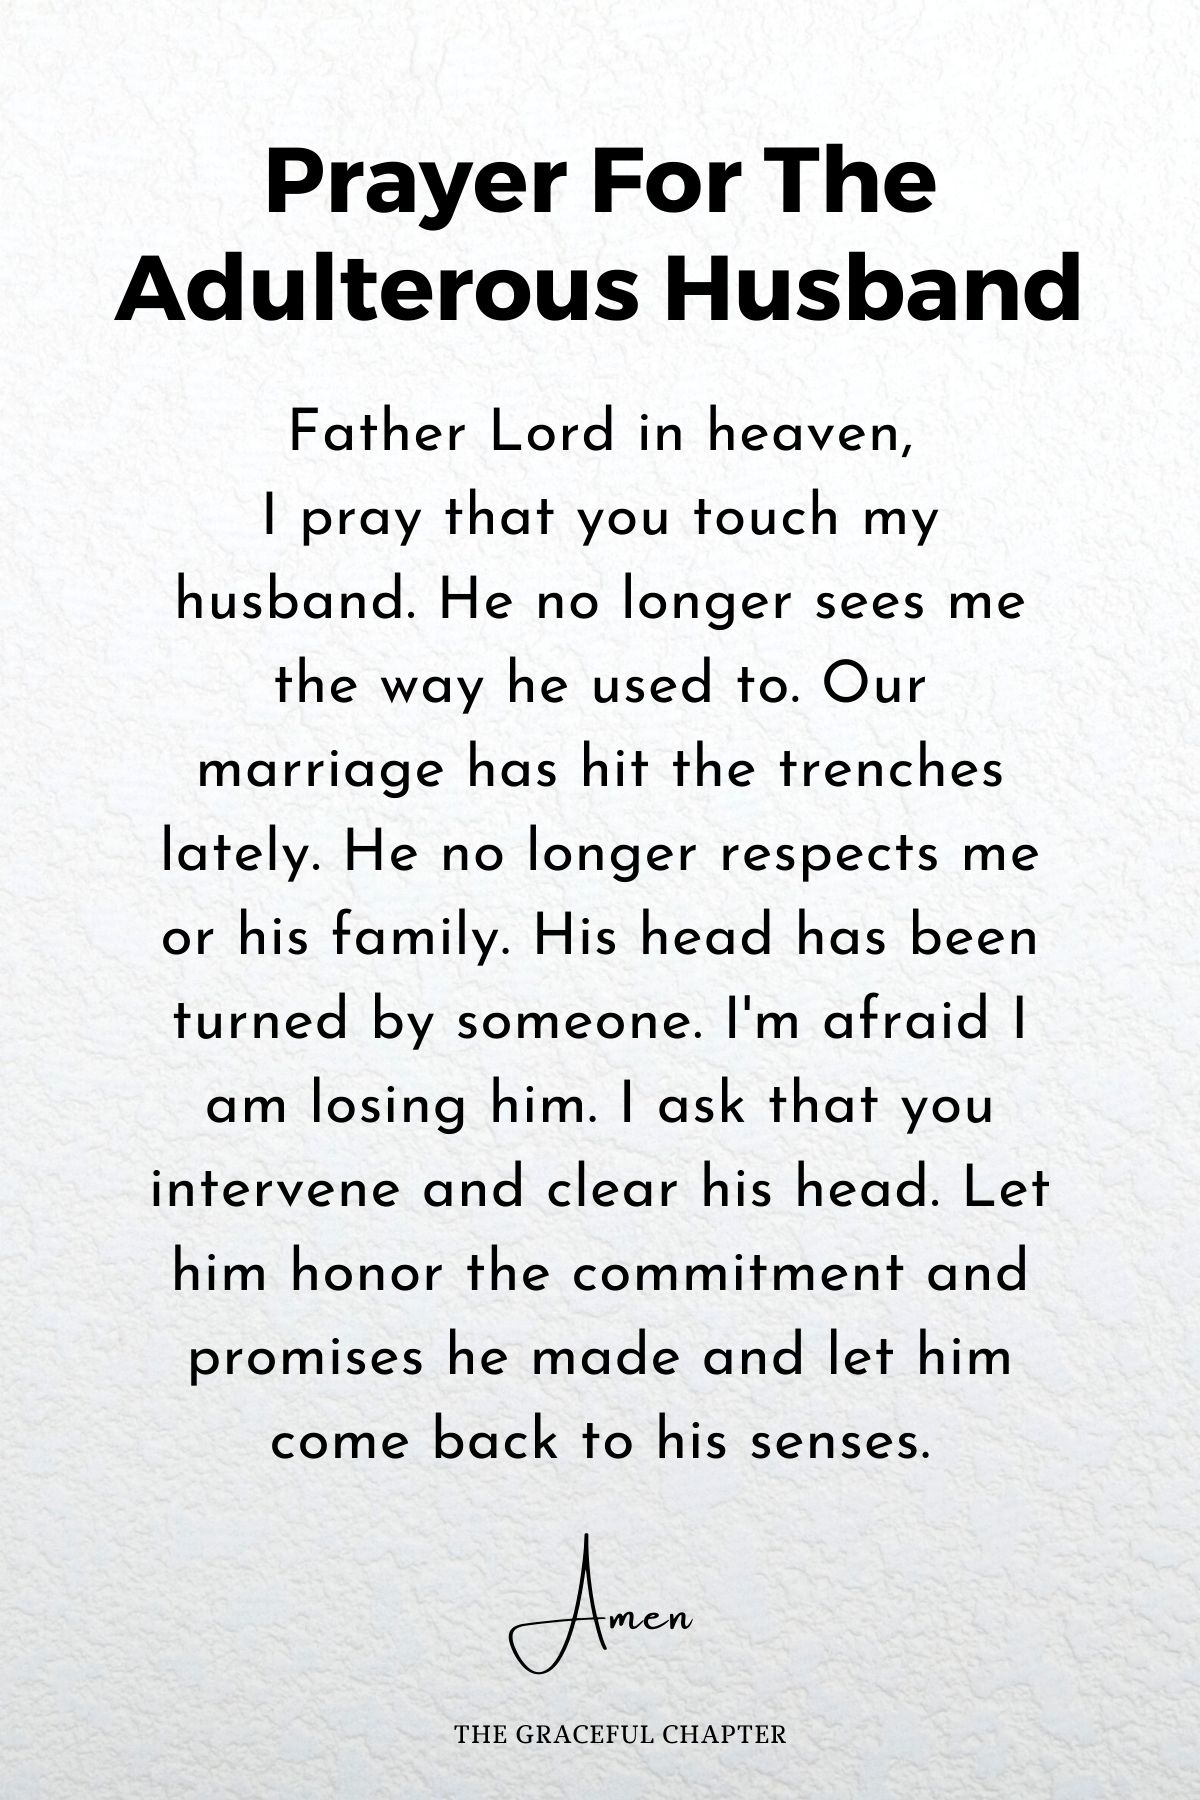 Prayer for the adulterous husband